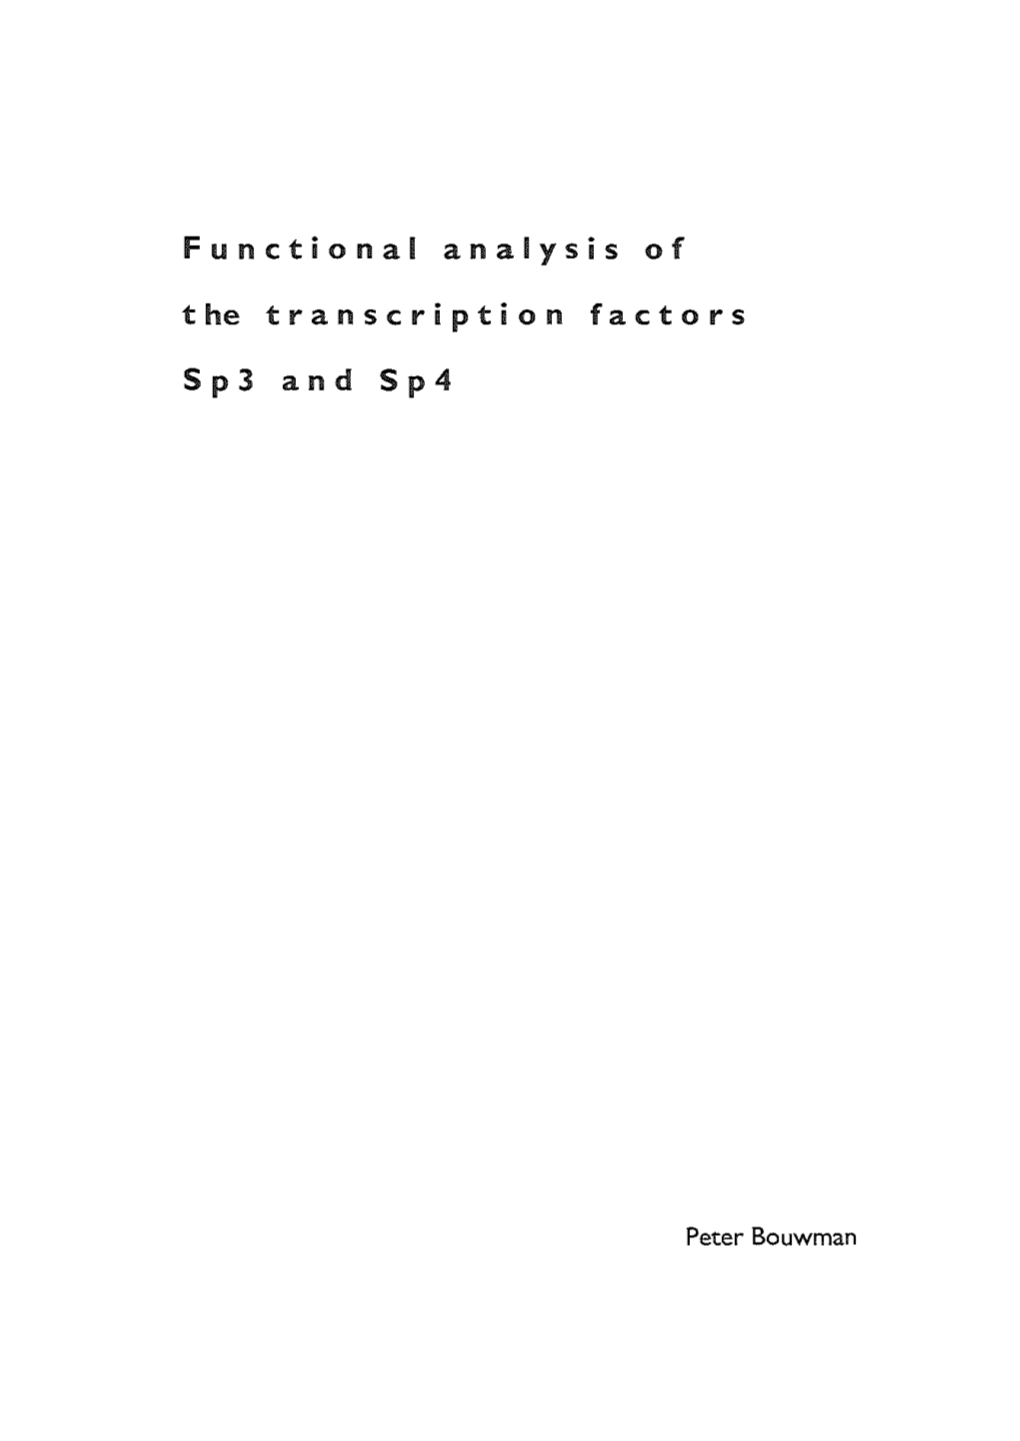 Functional Analysis of T He T R a N S C R I P T I O N F a C T O R S Sp3 And